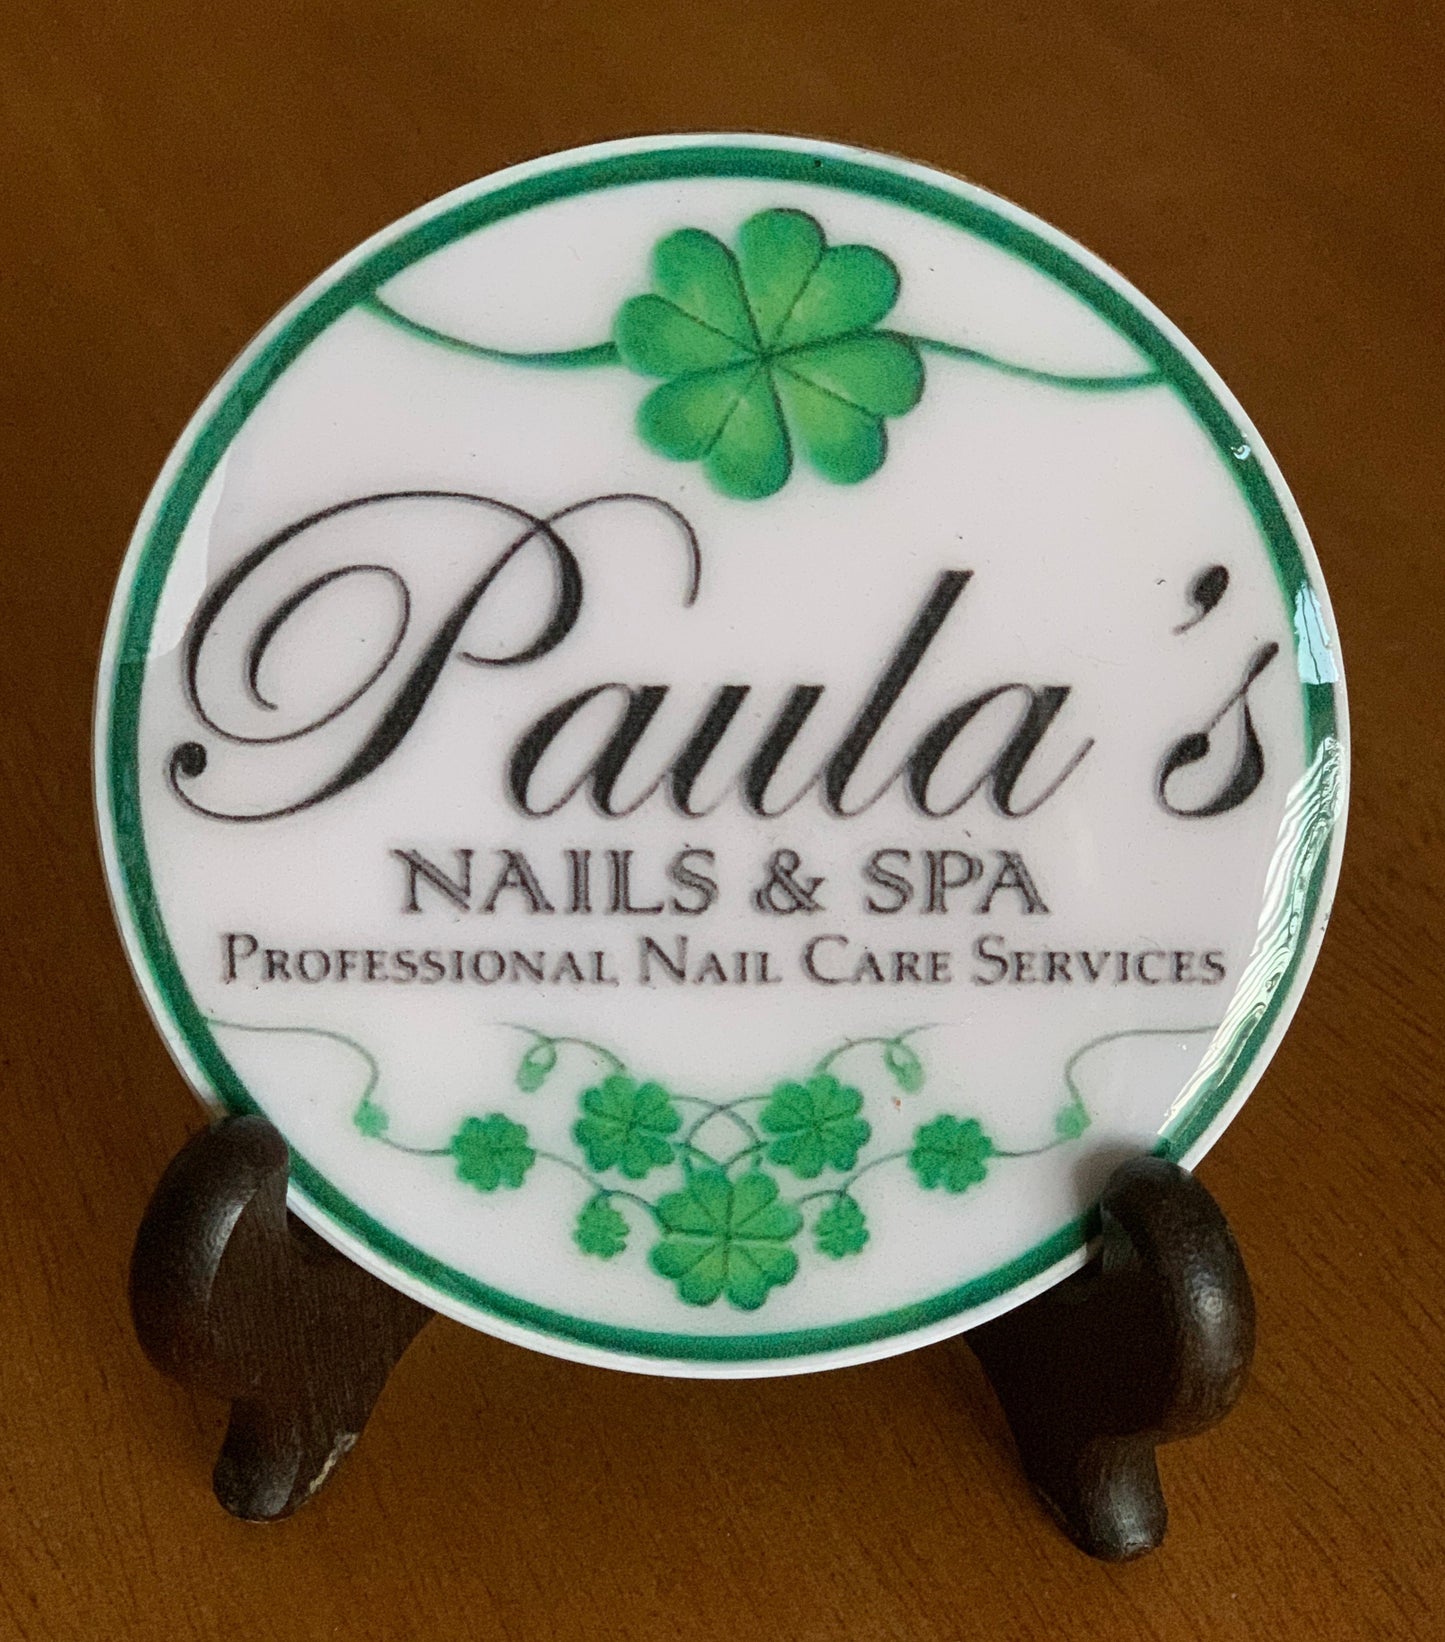 What a great Christmas gift for Paula that owns a nail salon.